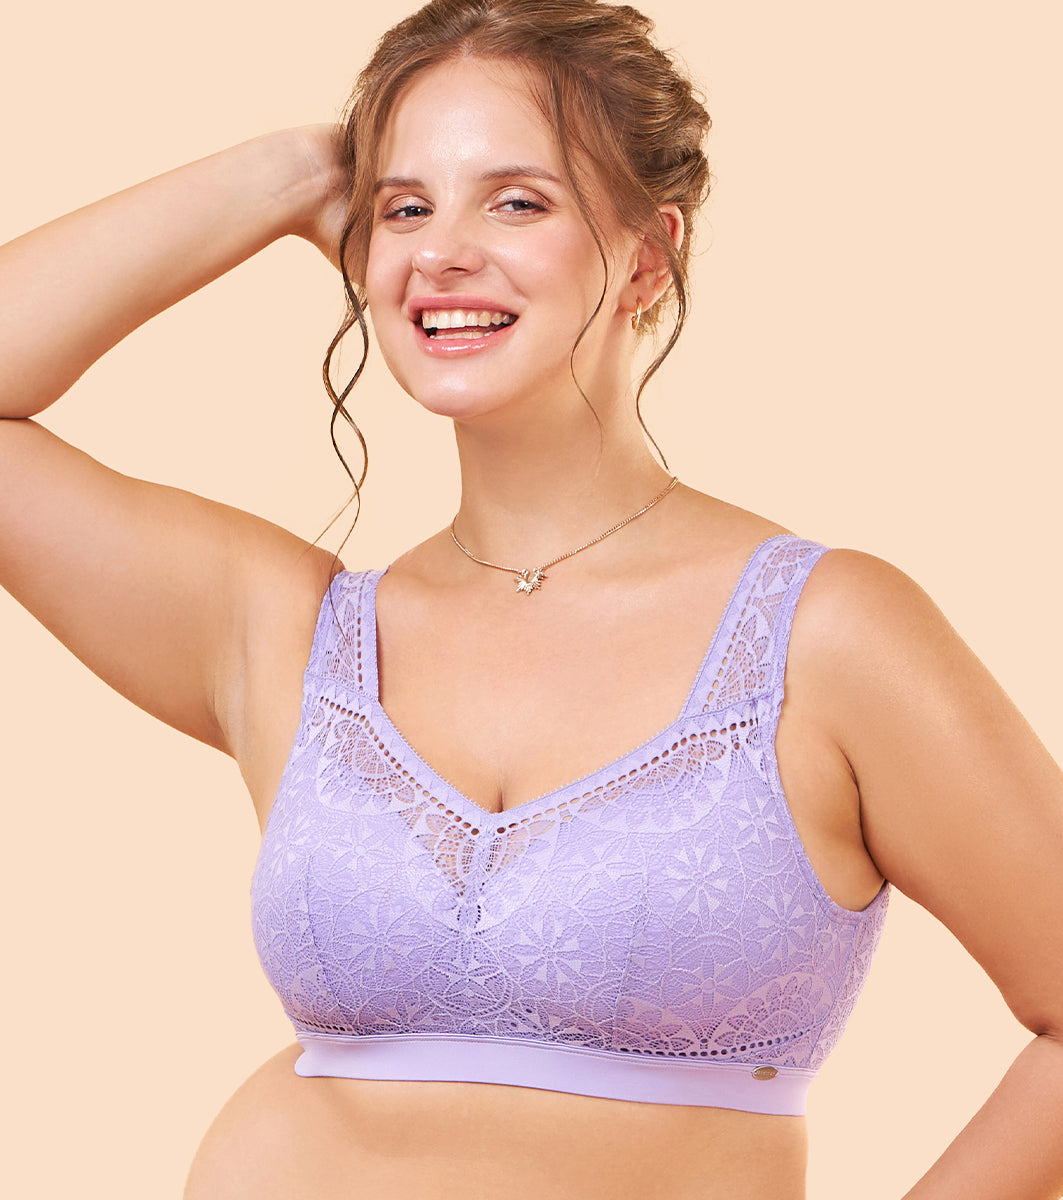 Enamor Pure Ease F118 Flexi-Comfort T-shirt Bra for Women- Full Coverage, Padded and Wirefree